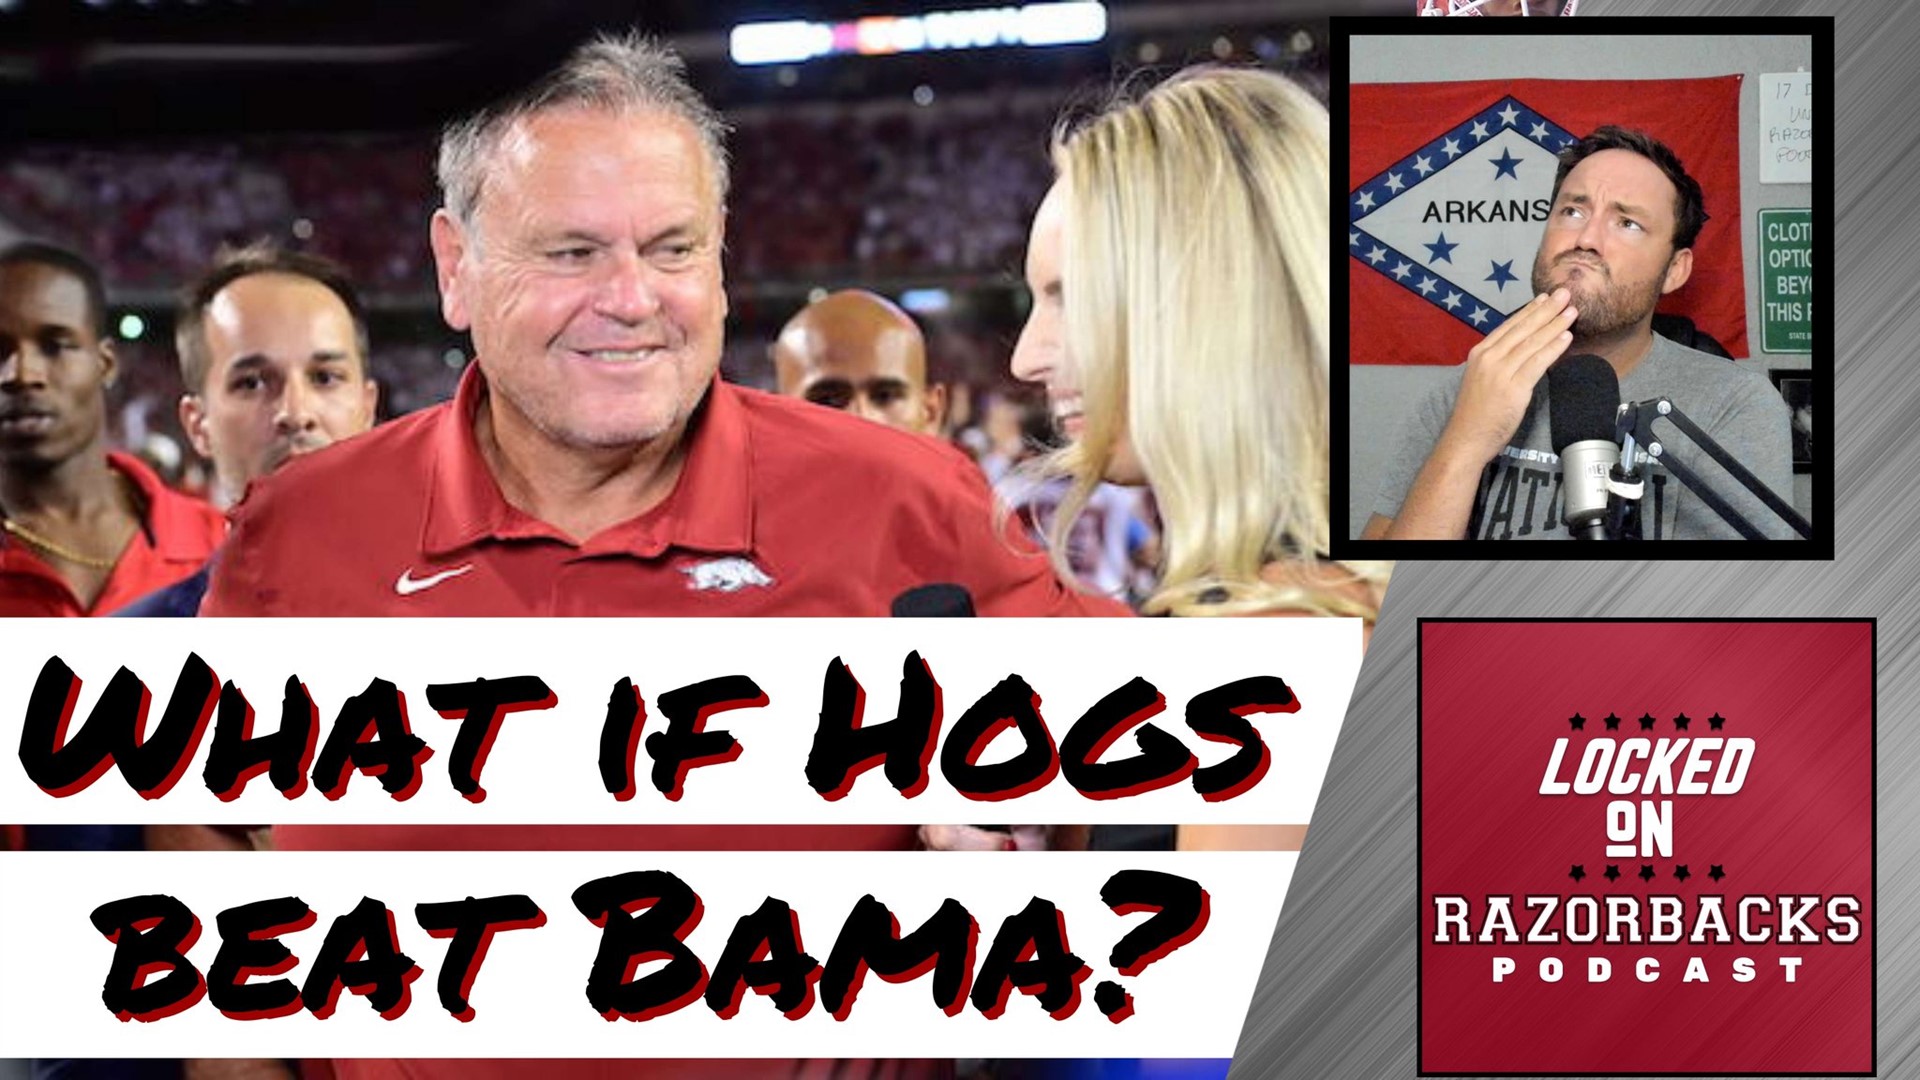 John Nabors discusses the scenarios of Razorback Football beating Alabama Crimson Tide for the first time since 2006 this season.